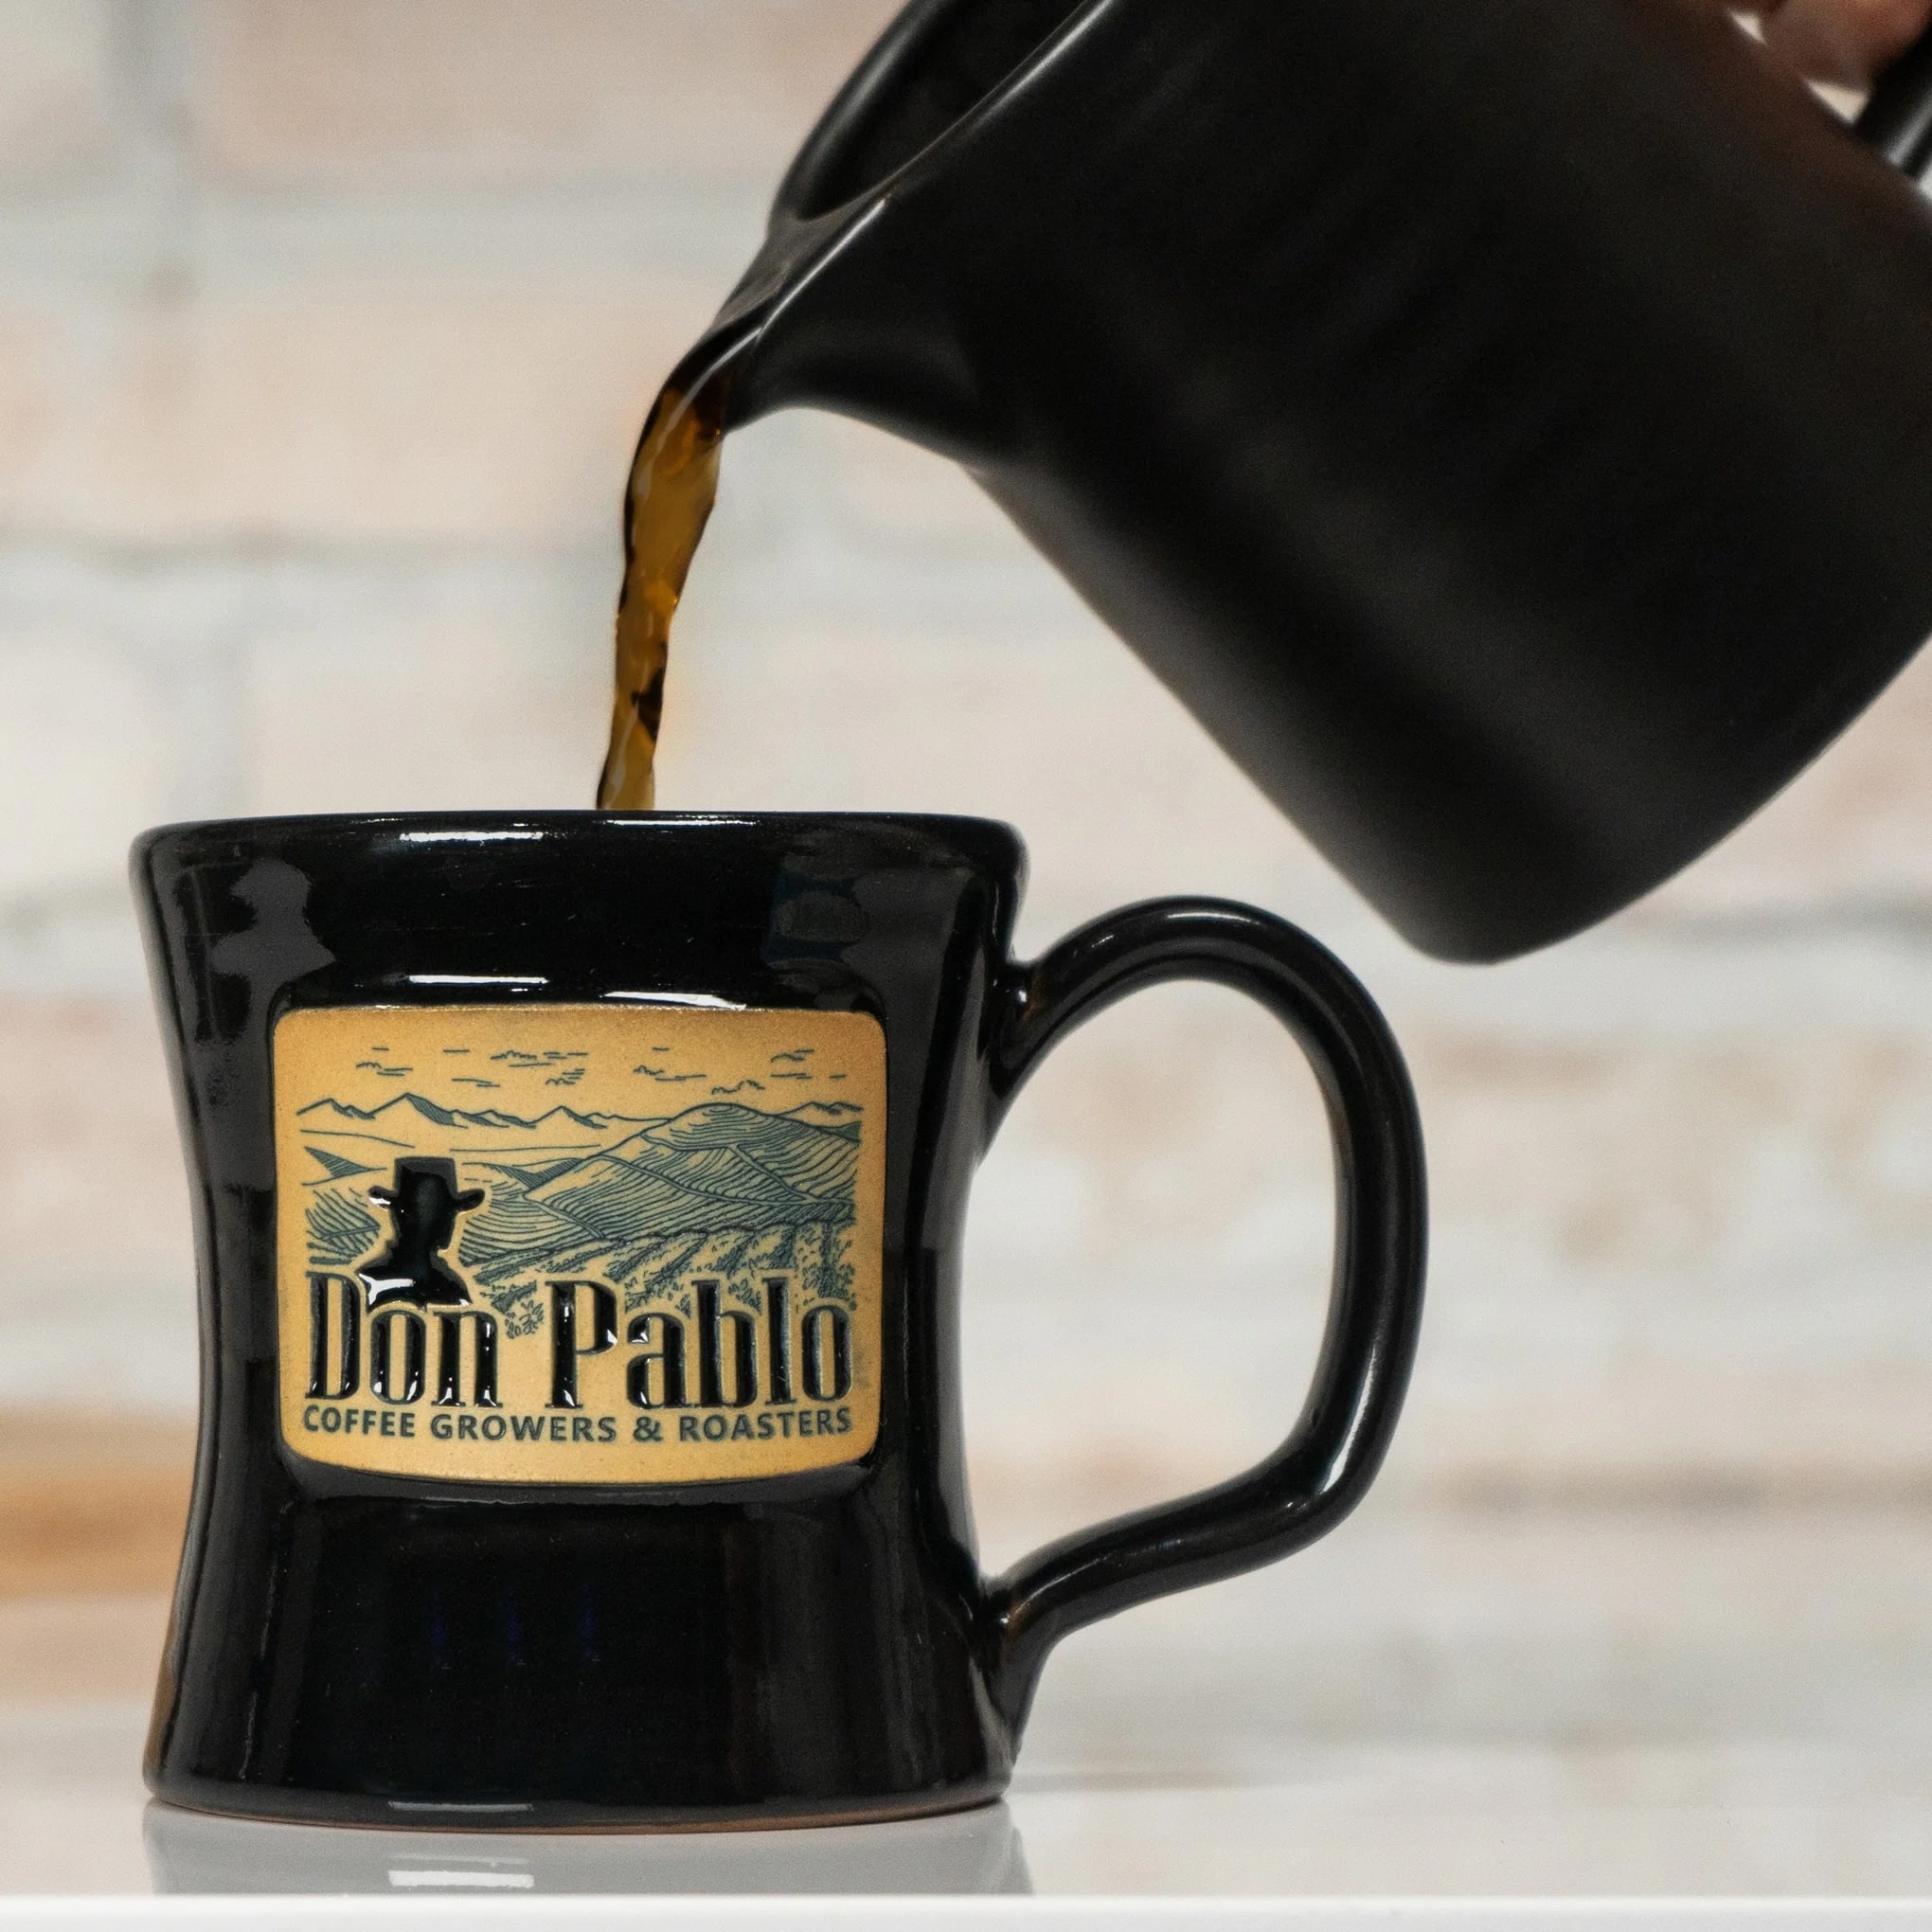 Coffee being poured into a black mug with "Don Pablo Coffee Growers & Roasters" logo on it, against a brick wall backdrop.